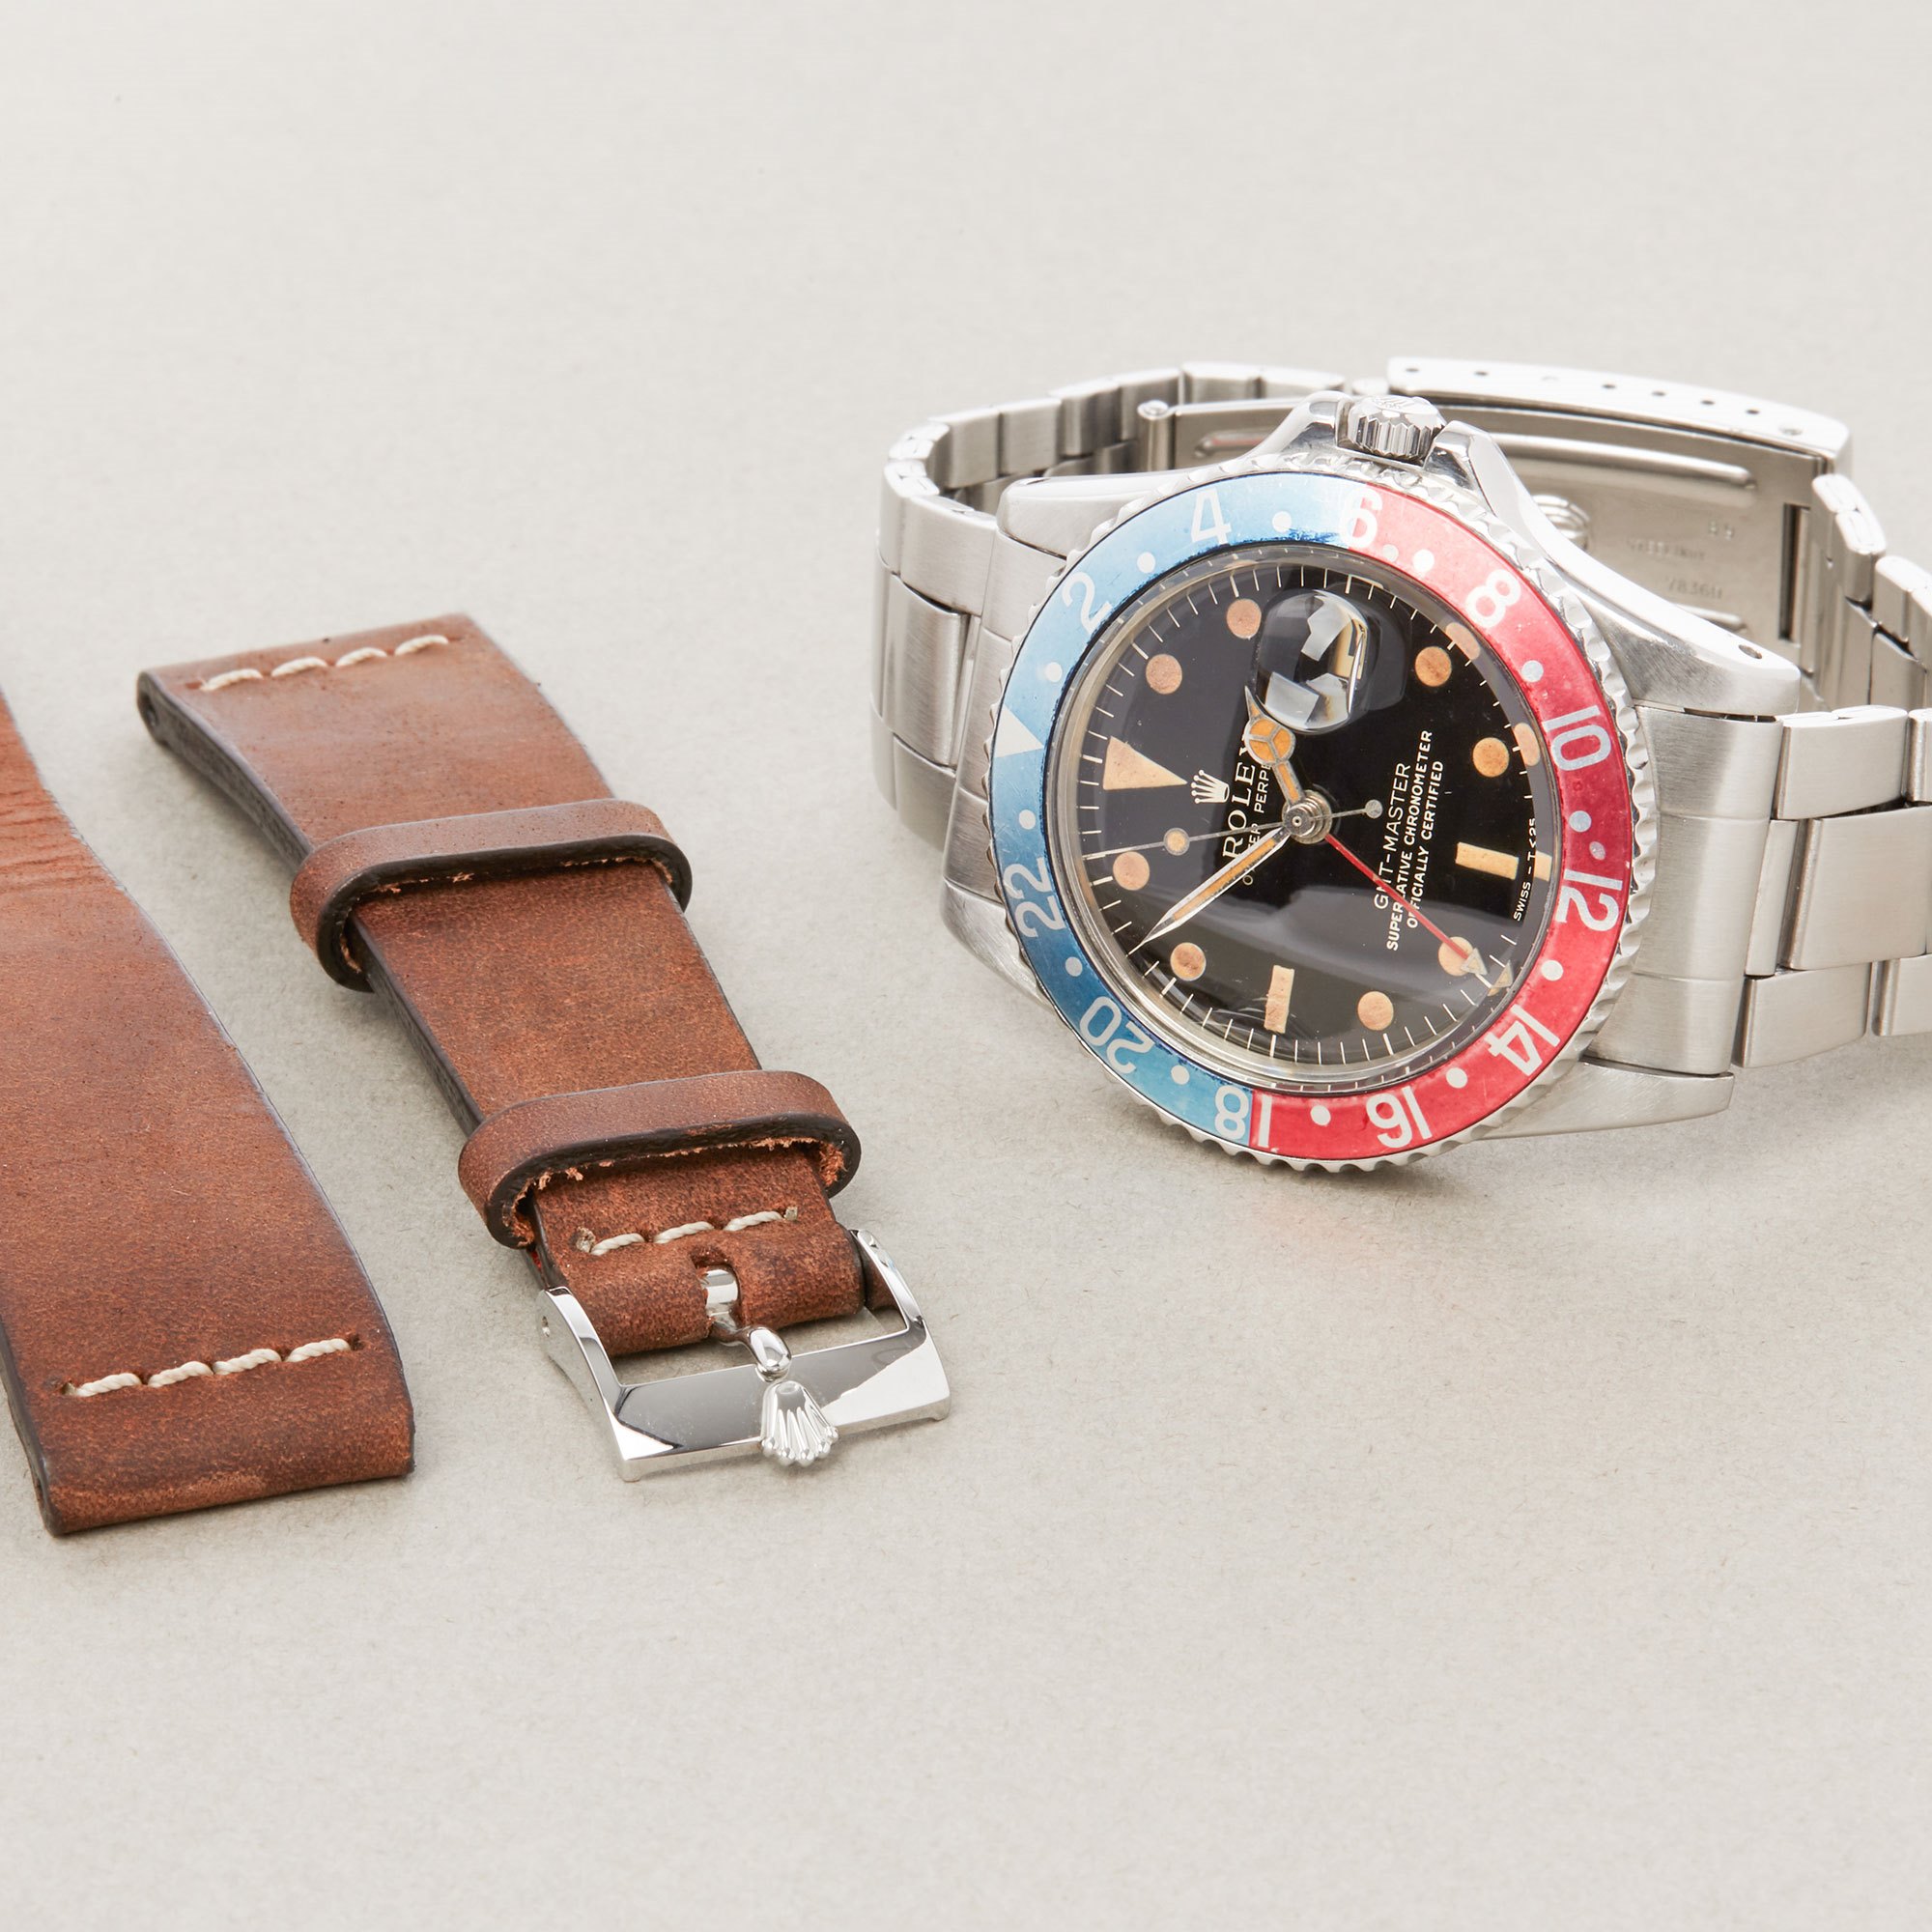 Rolex GMT-Master Pepsi Gilt Dial Stainless Steel - 1675 Stainless Steel 1675